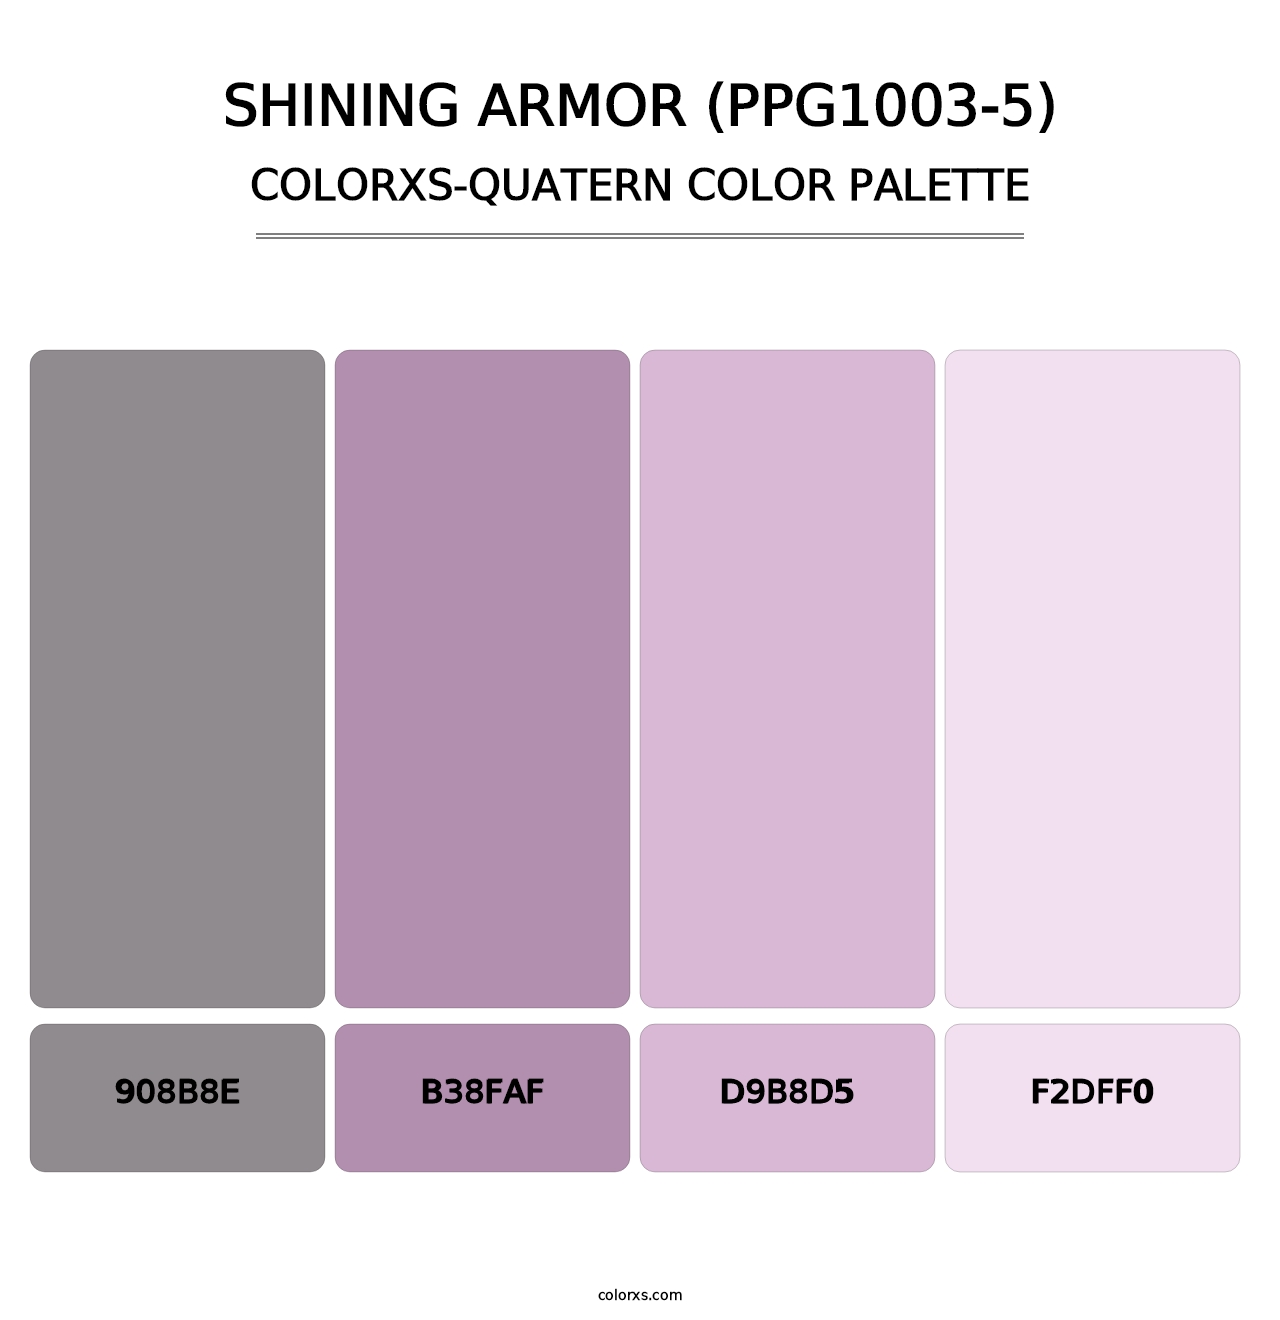 Shining Armor (PPG1003-5) - Colorxs Quatern Palette